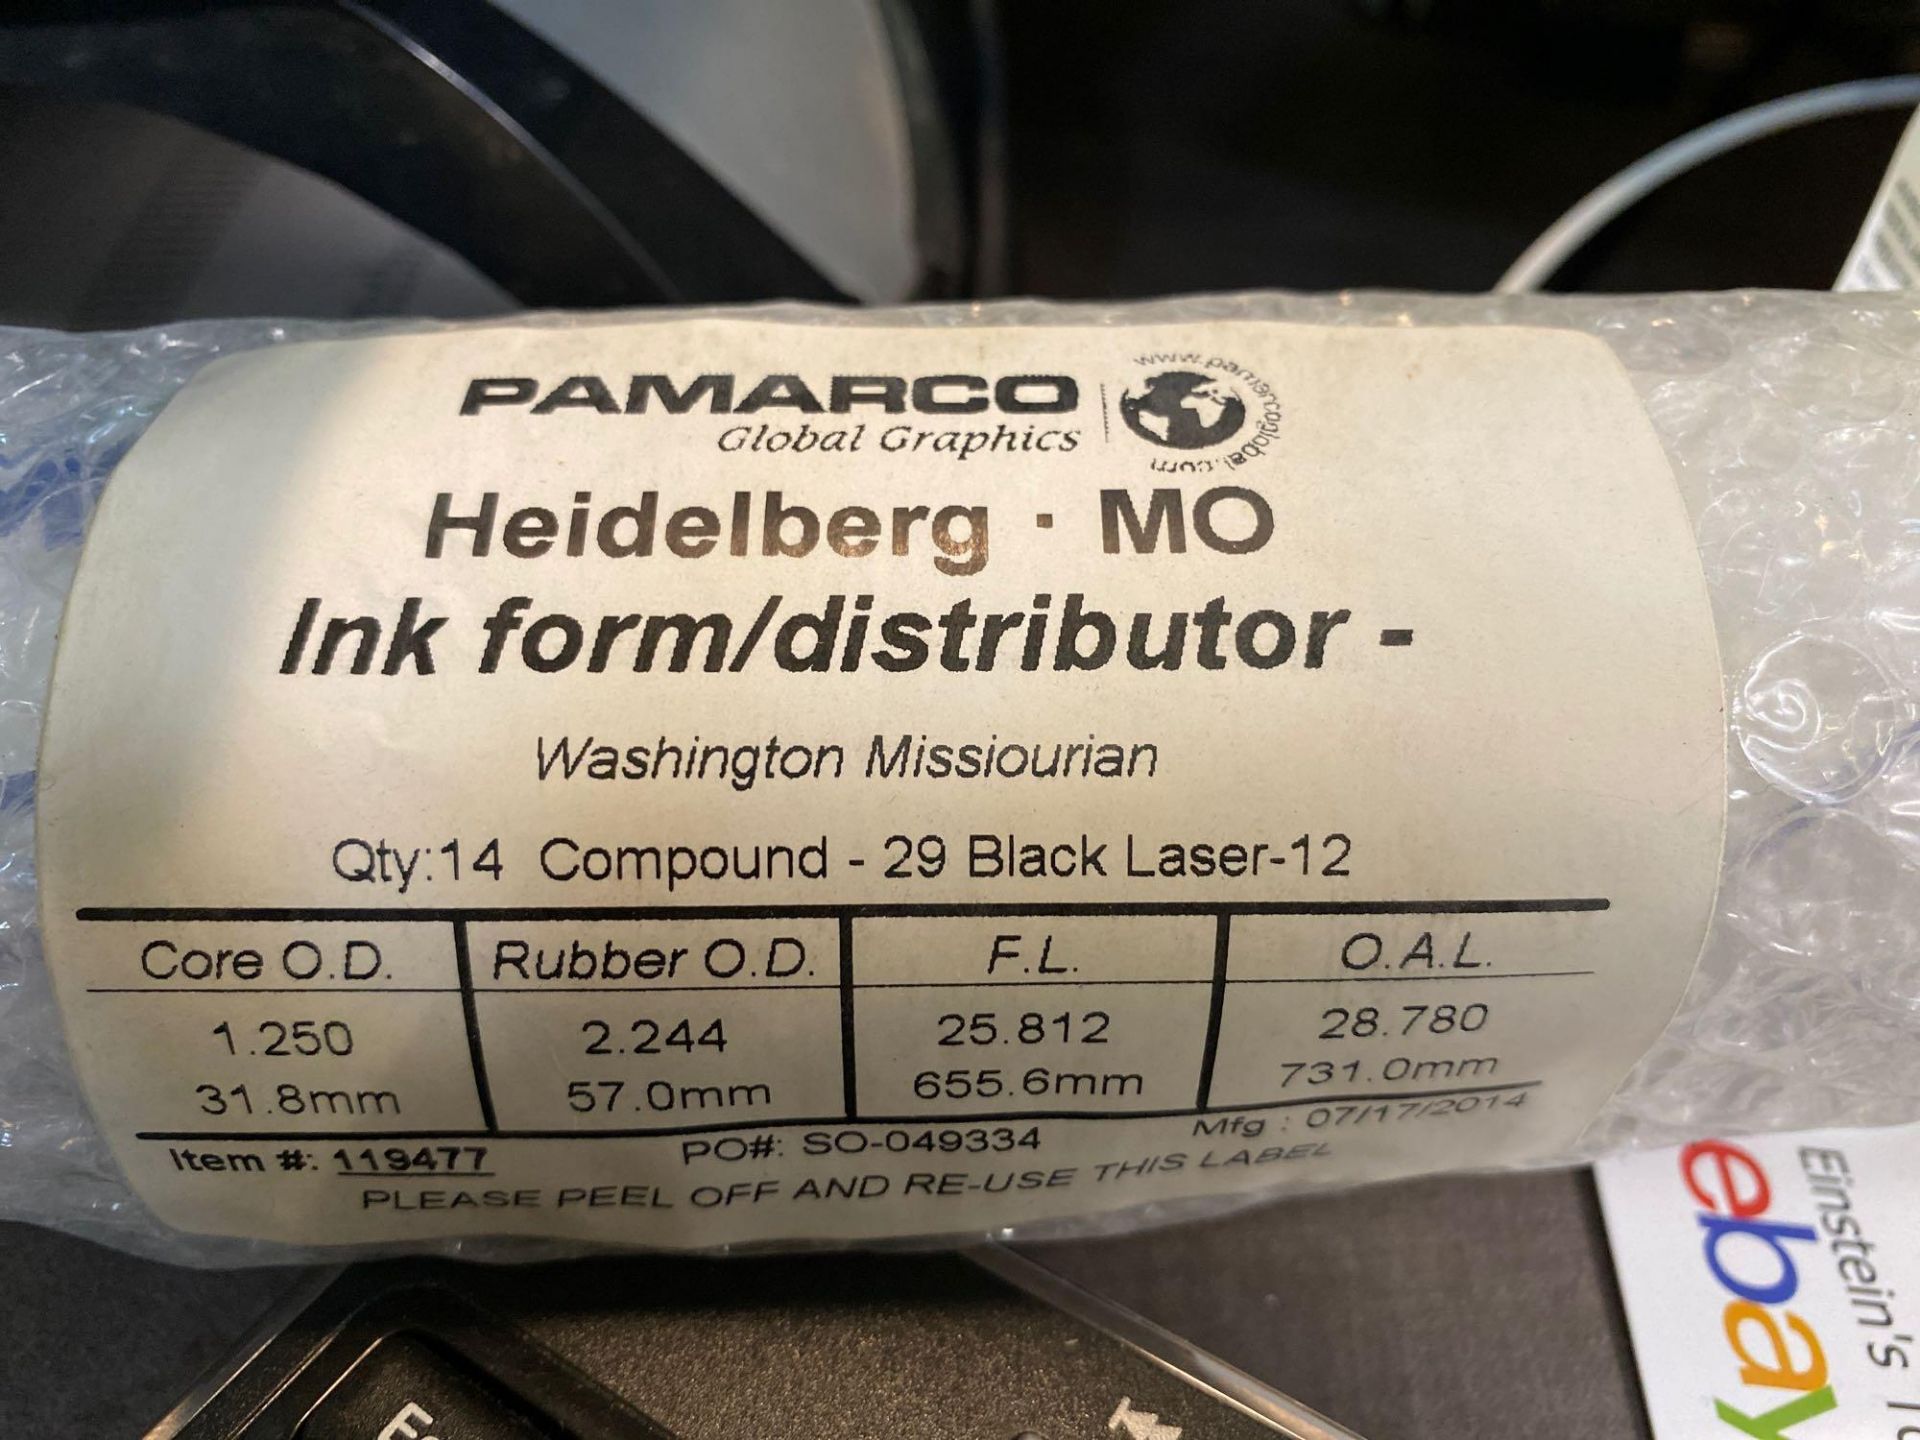 Pamarco Heidelberg Ink Rollers Assorted Colors - Image 4 of 4